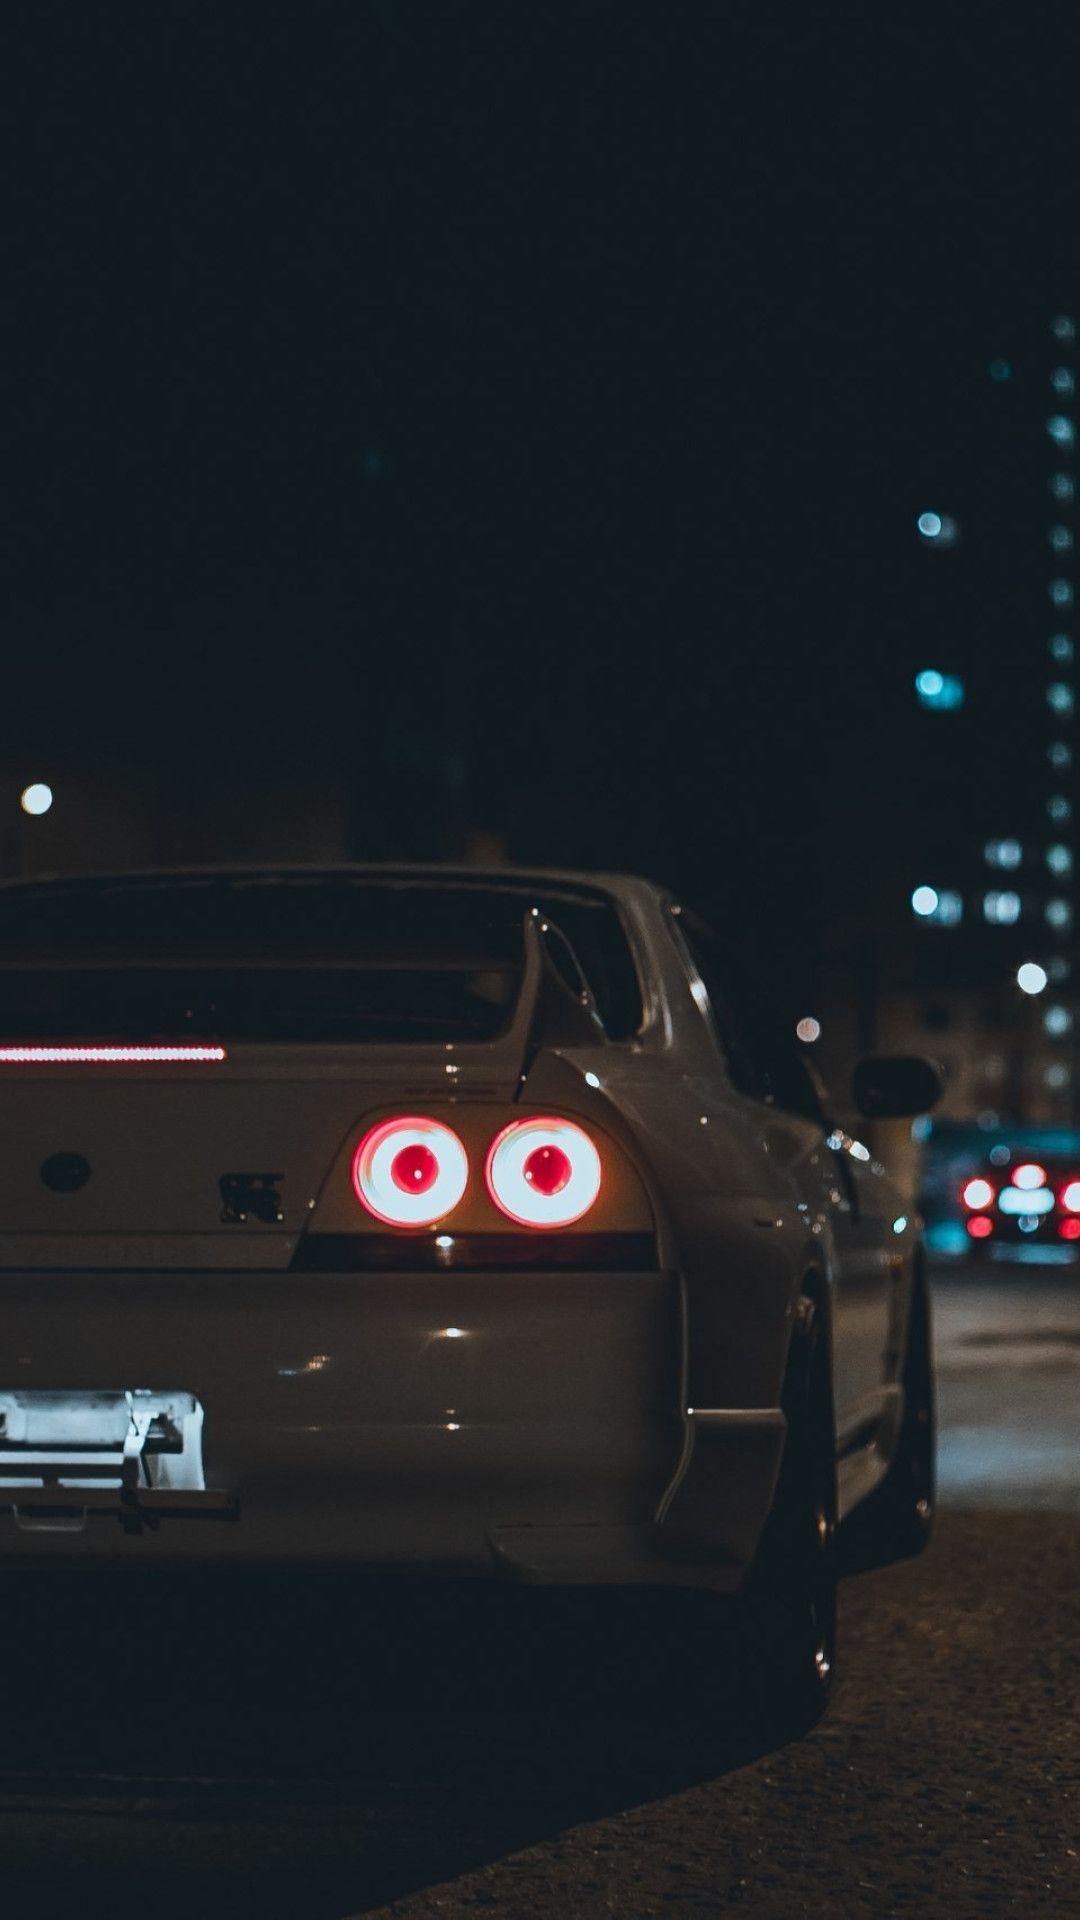 3840x2162 / cars, city, drive, fast, light, lights, london, long exposure,  middle of way, speed, street, way 4k wallpaper - Coolwallpapers.me!